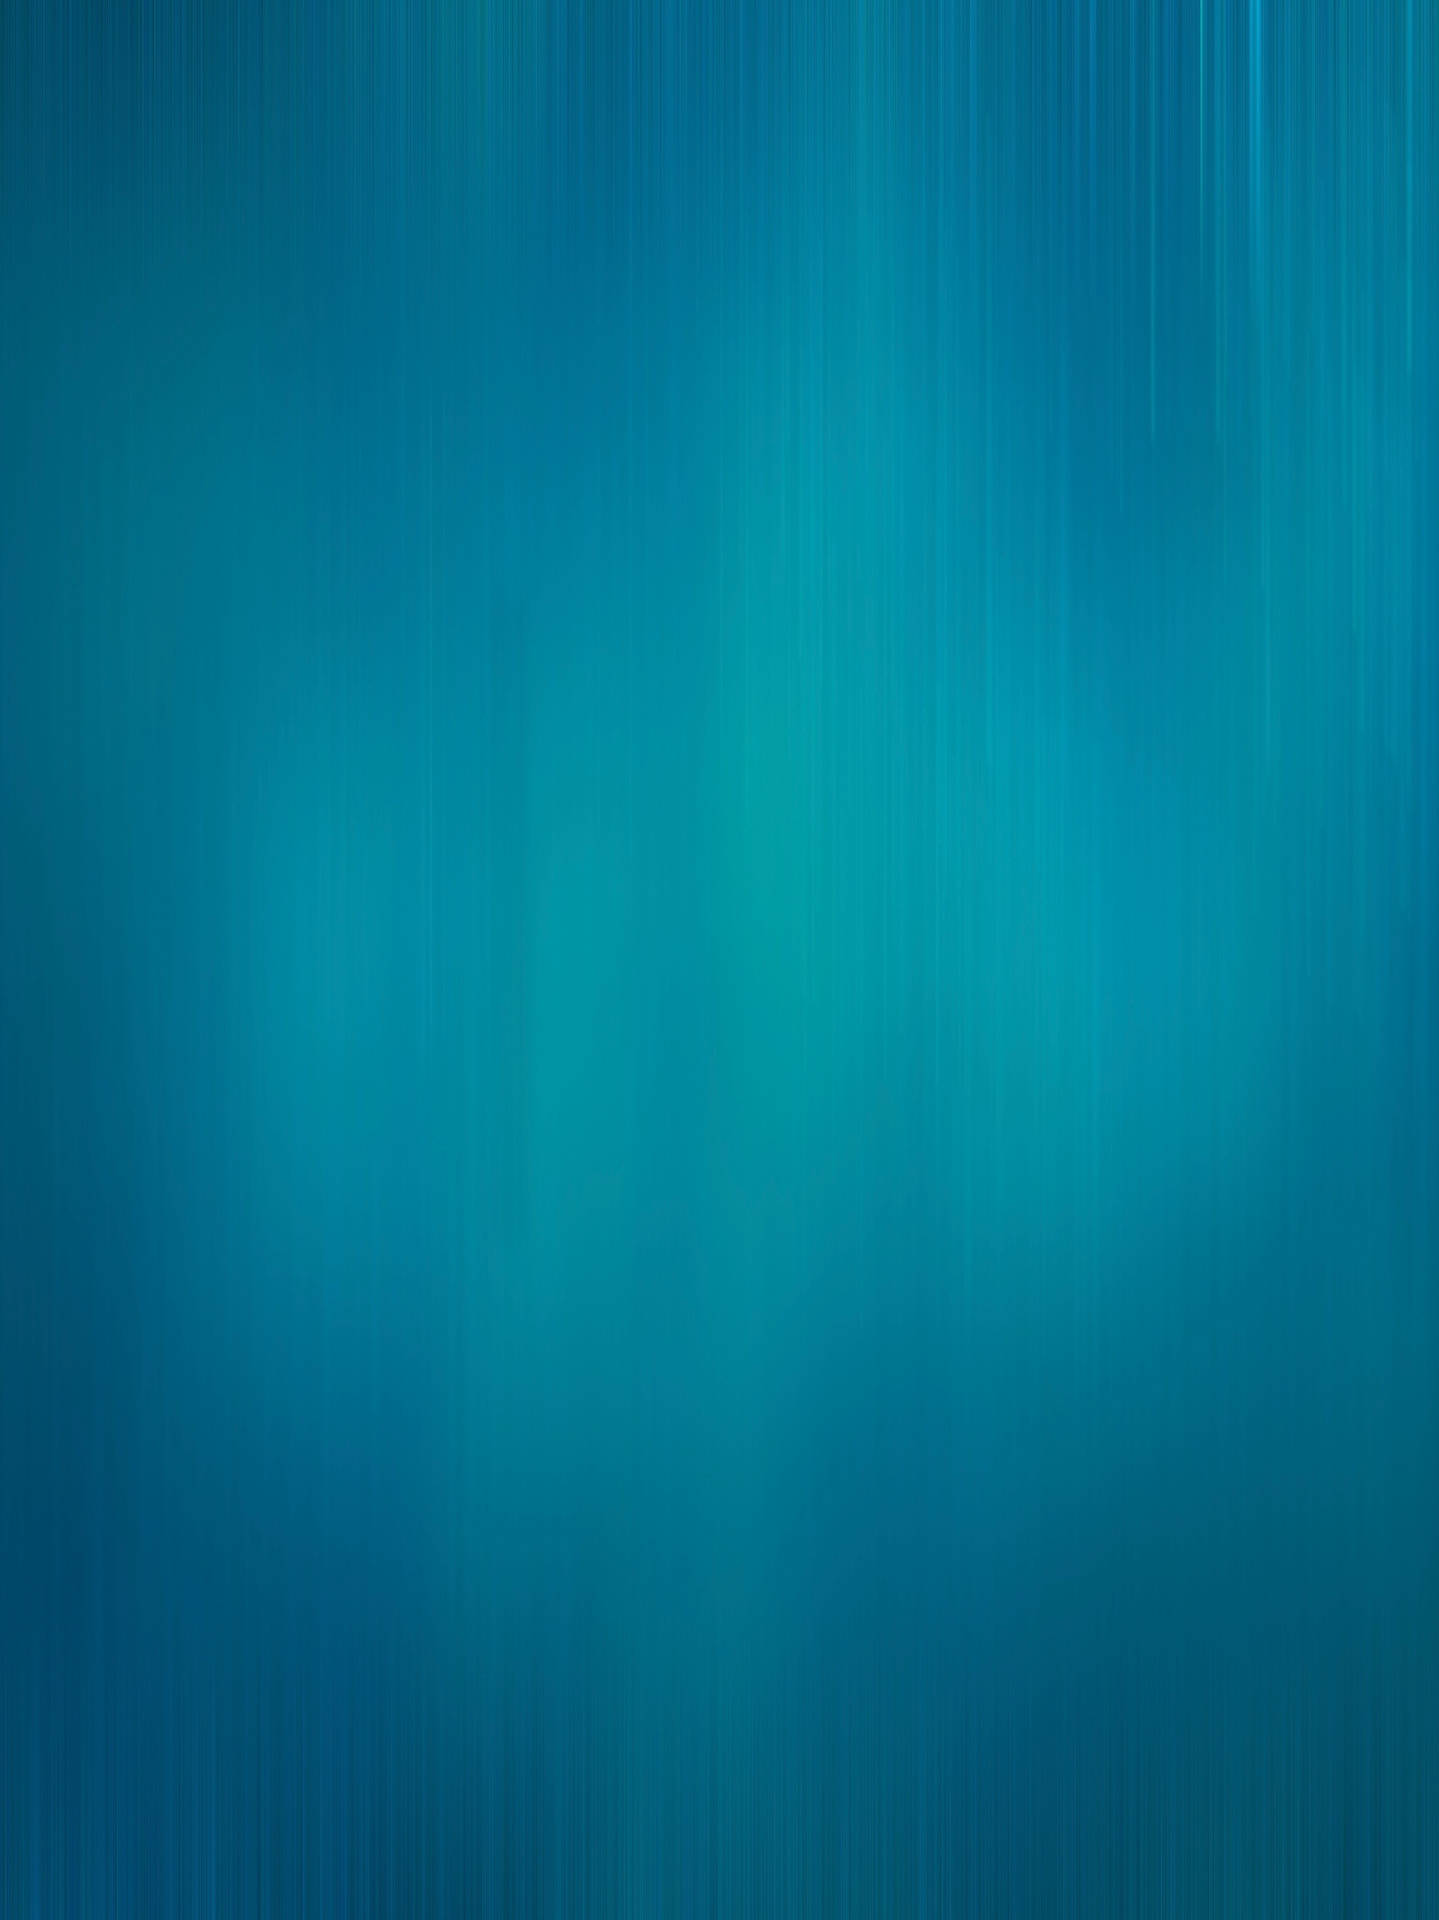 Serenity in Shades of Blue Background Wallpaper